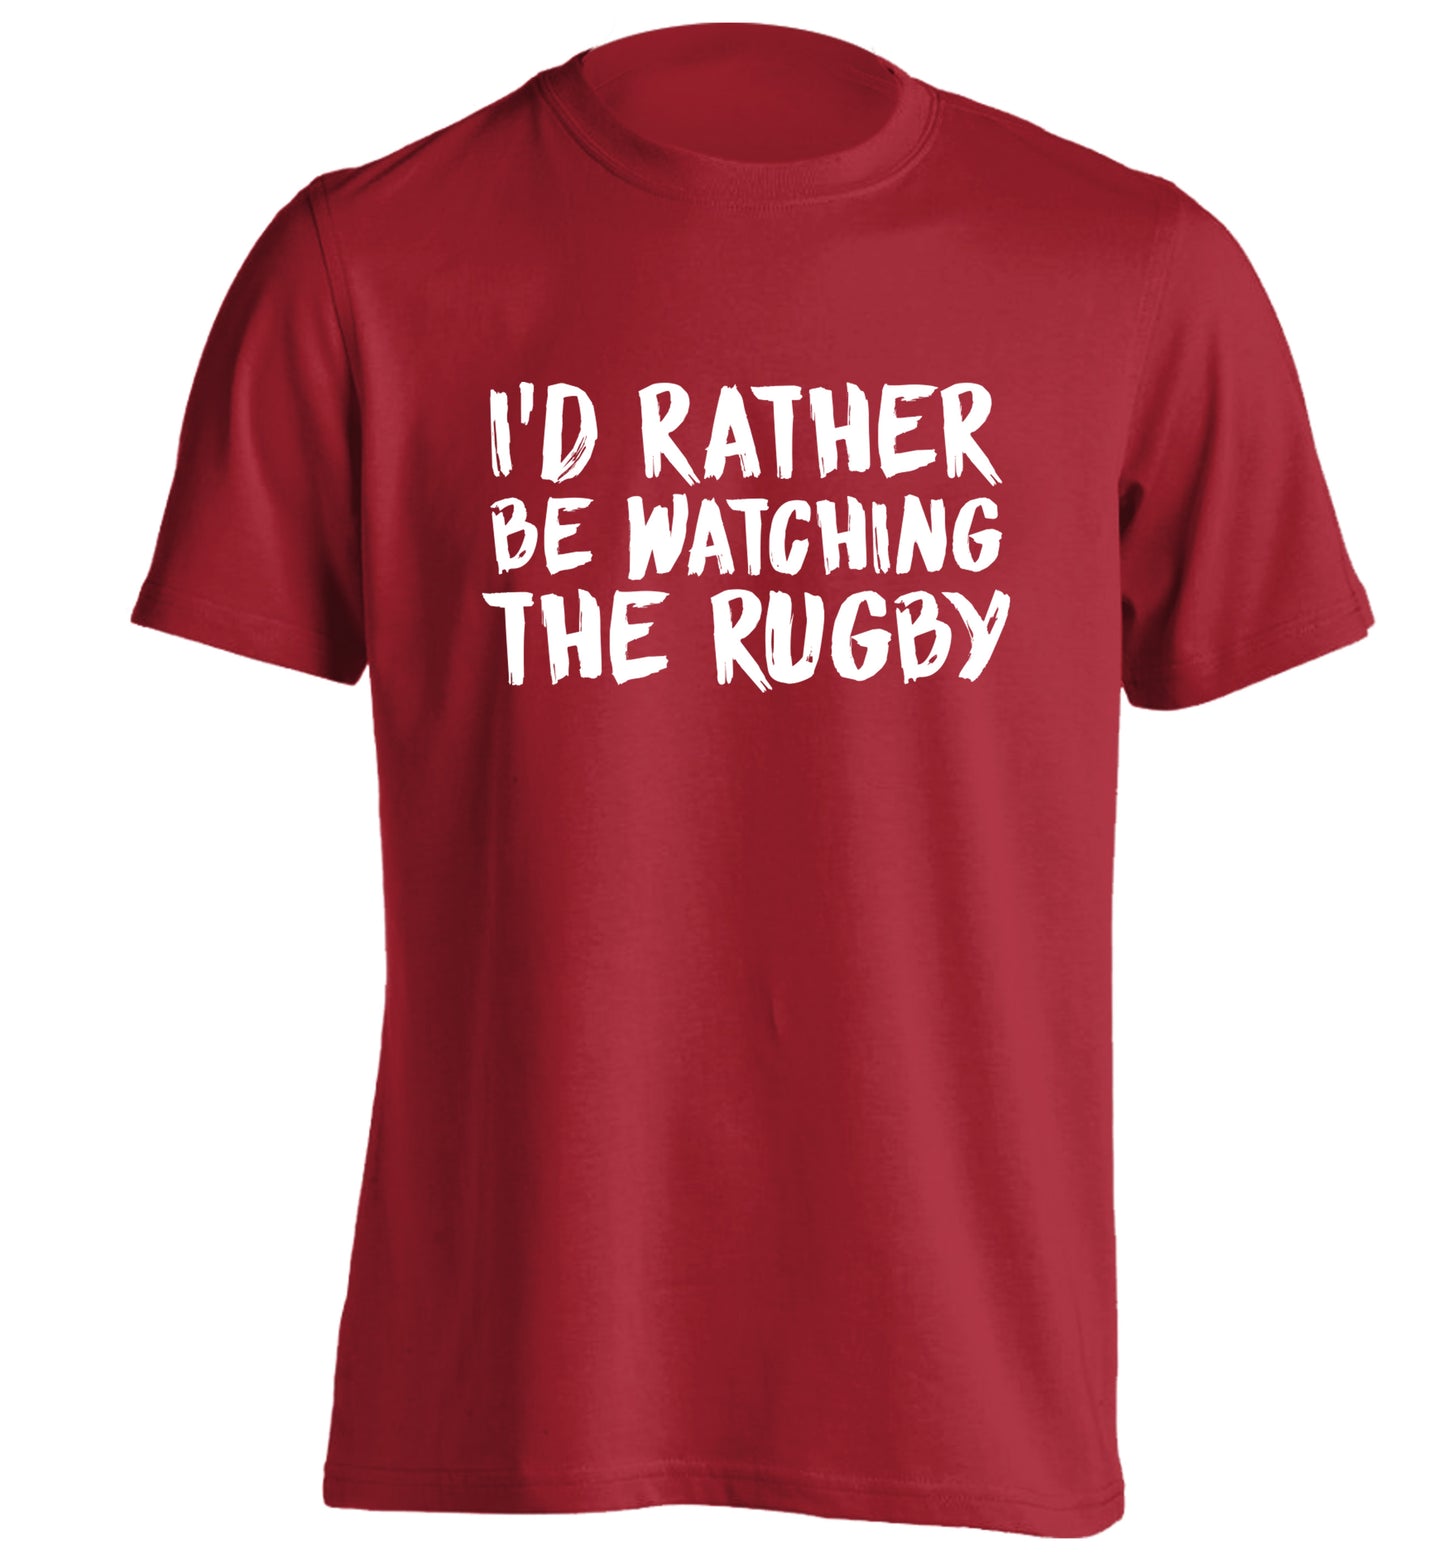 I'd rather be watching the rugby adults unisex red Tshirt 2XL